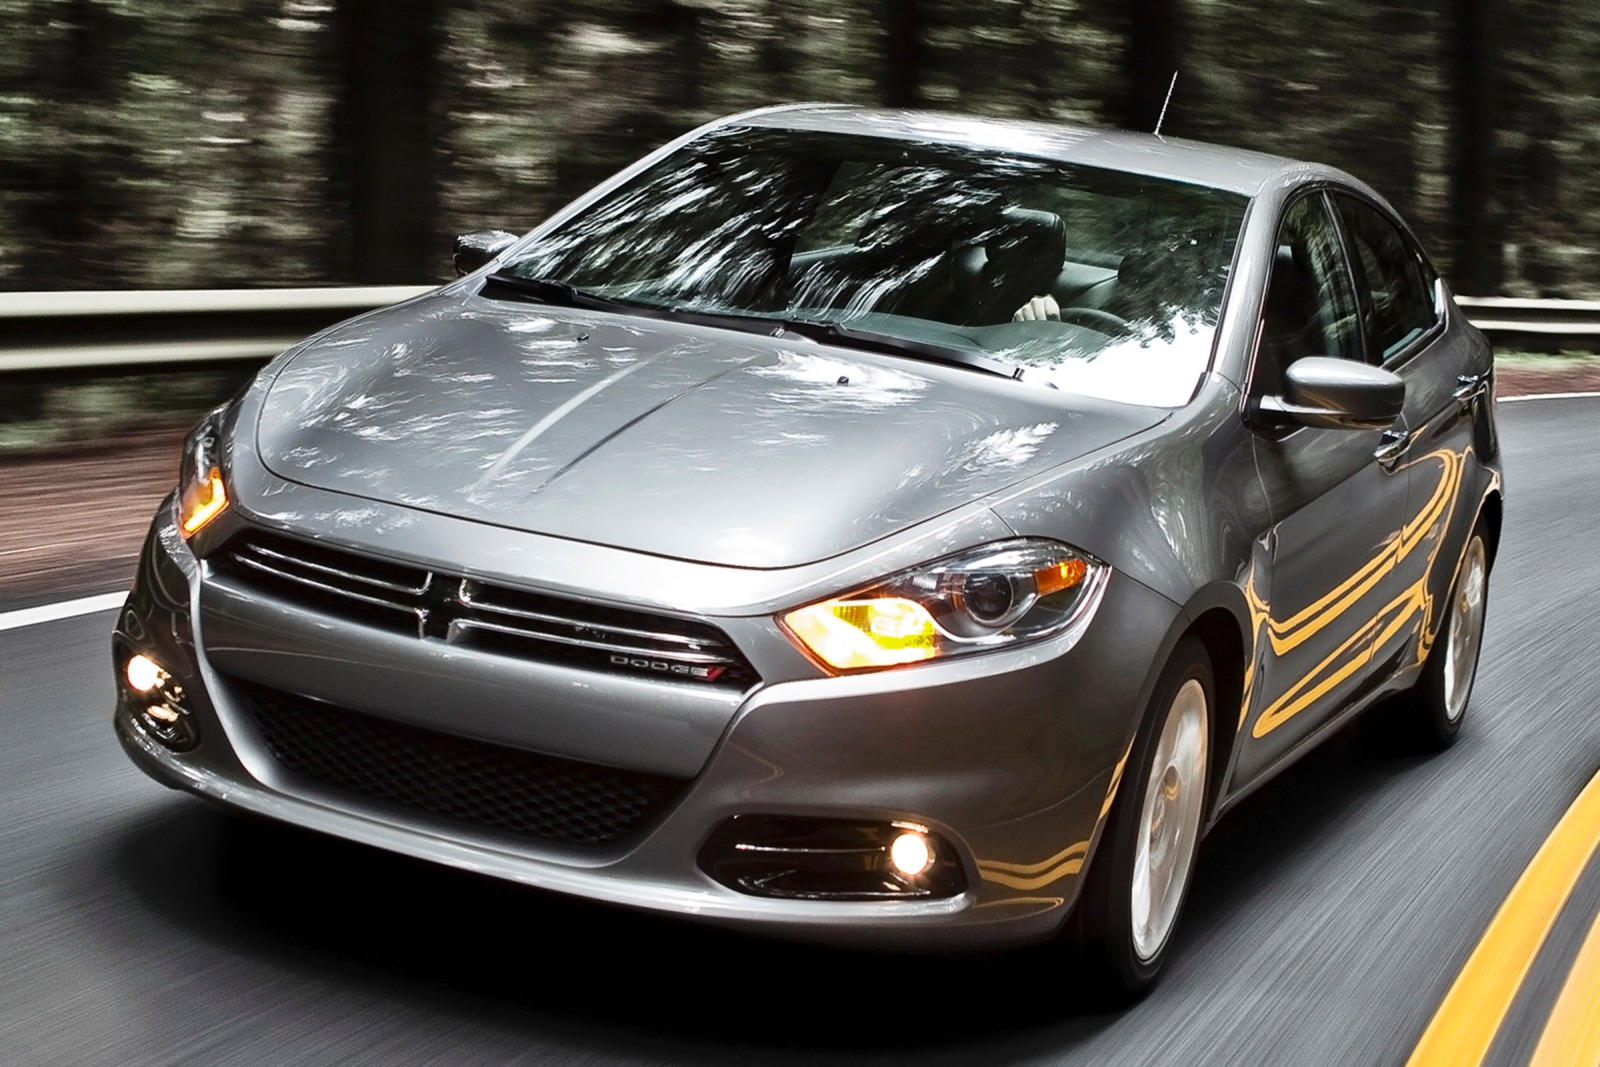 2015 Dodge Dart Front View Driving